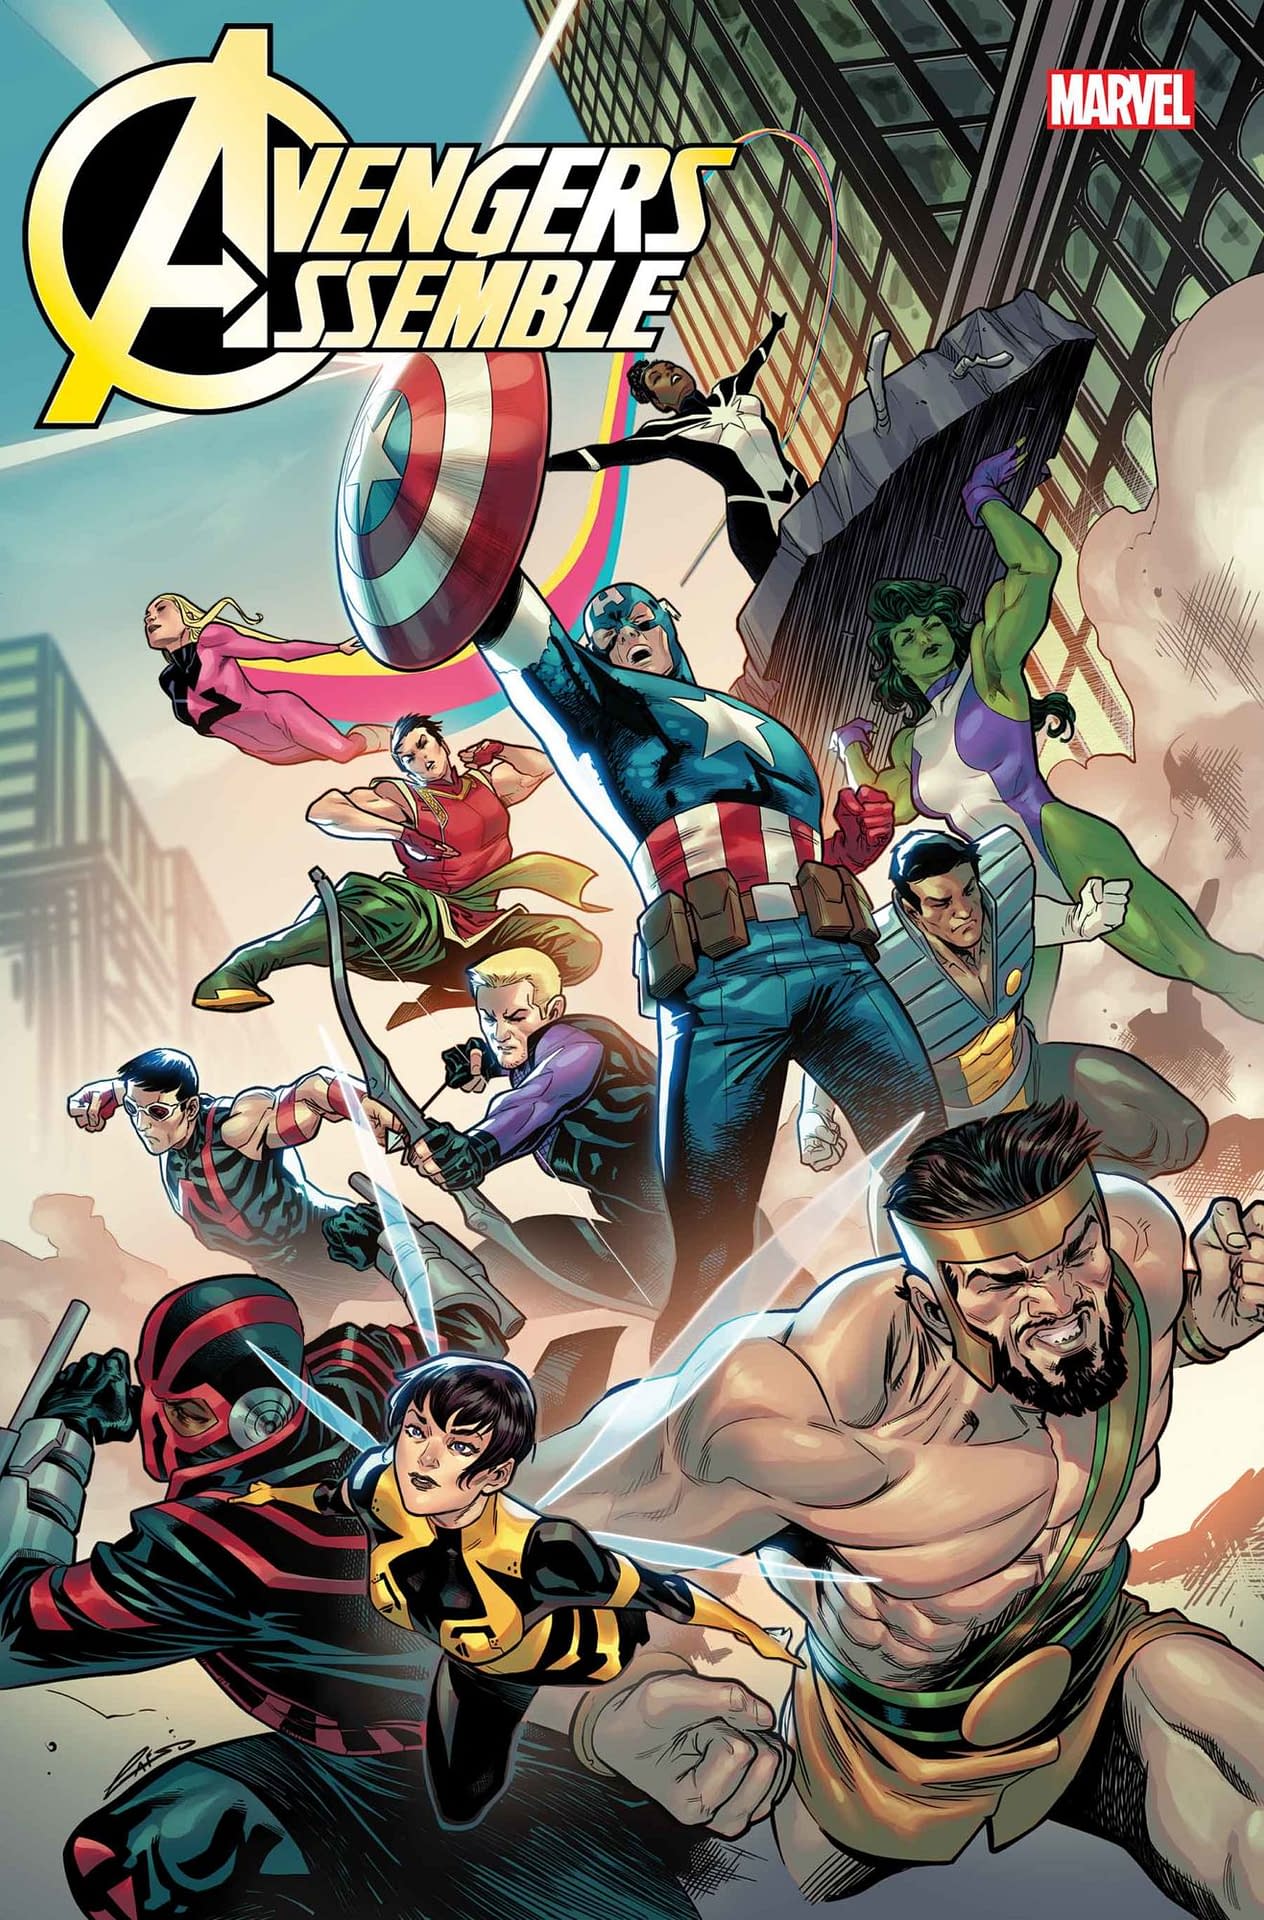 Marvel Launches Avengers Assemble in September, Jackets Required